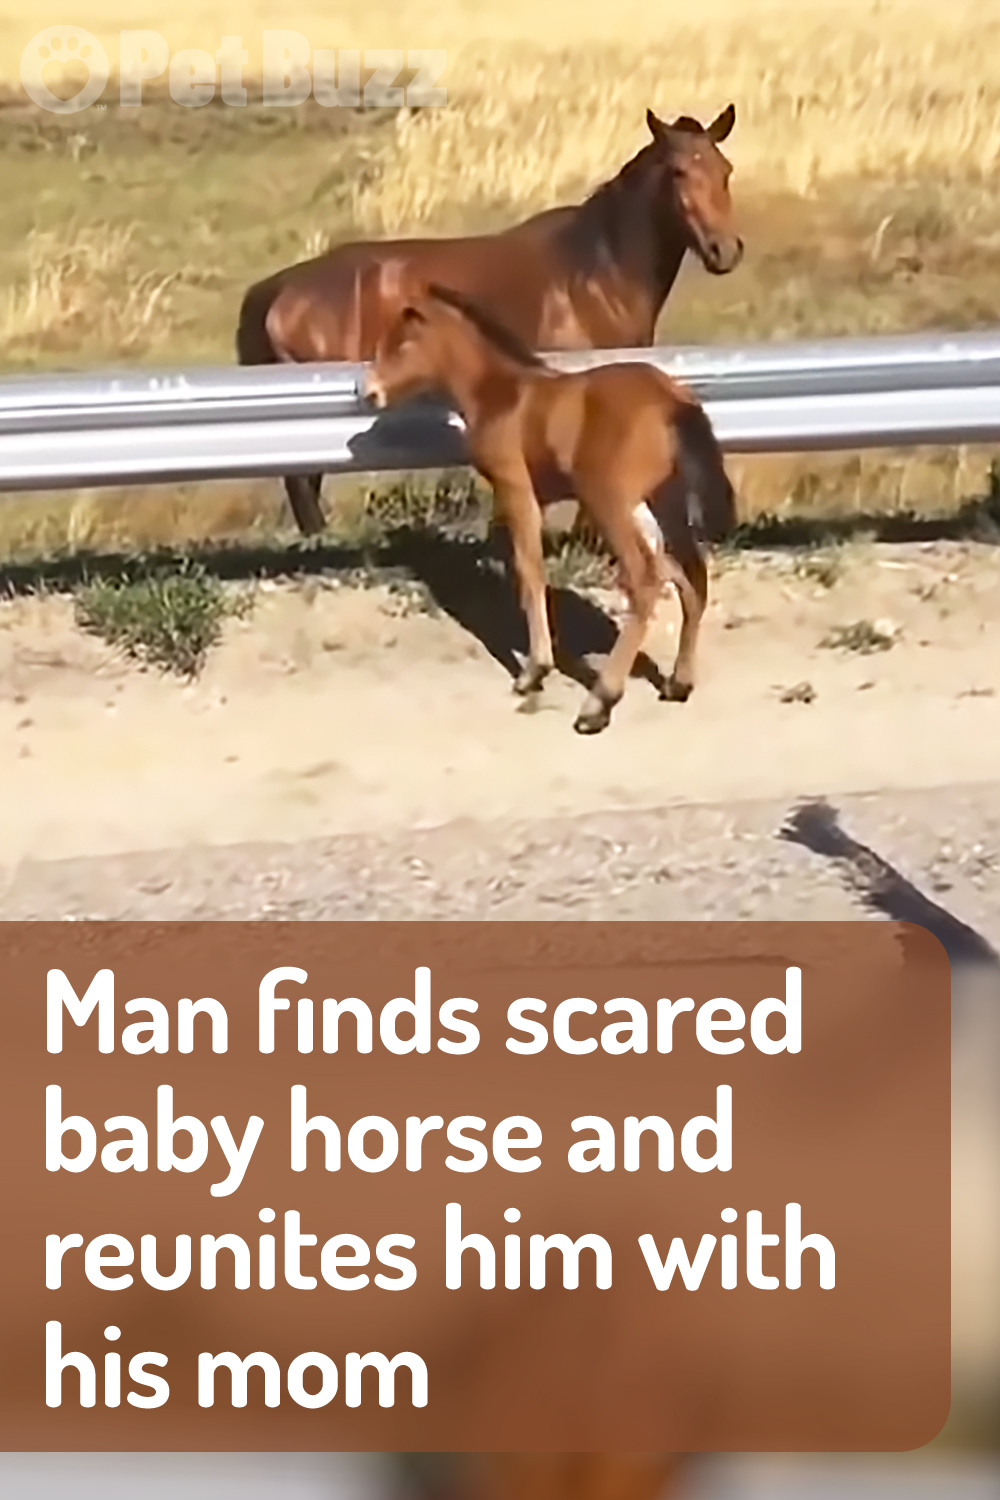 Man finds scared baby horse and reunites him with his mom